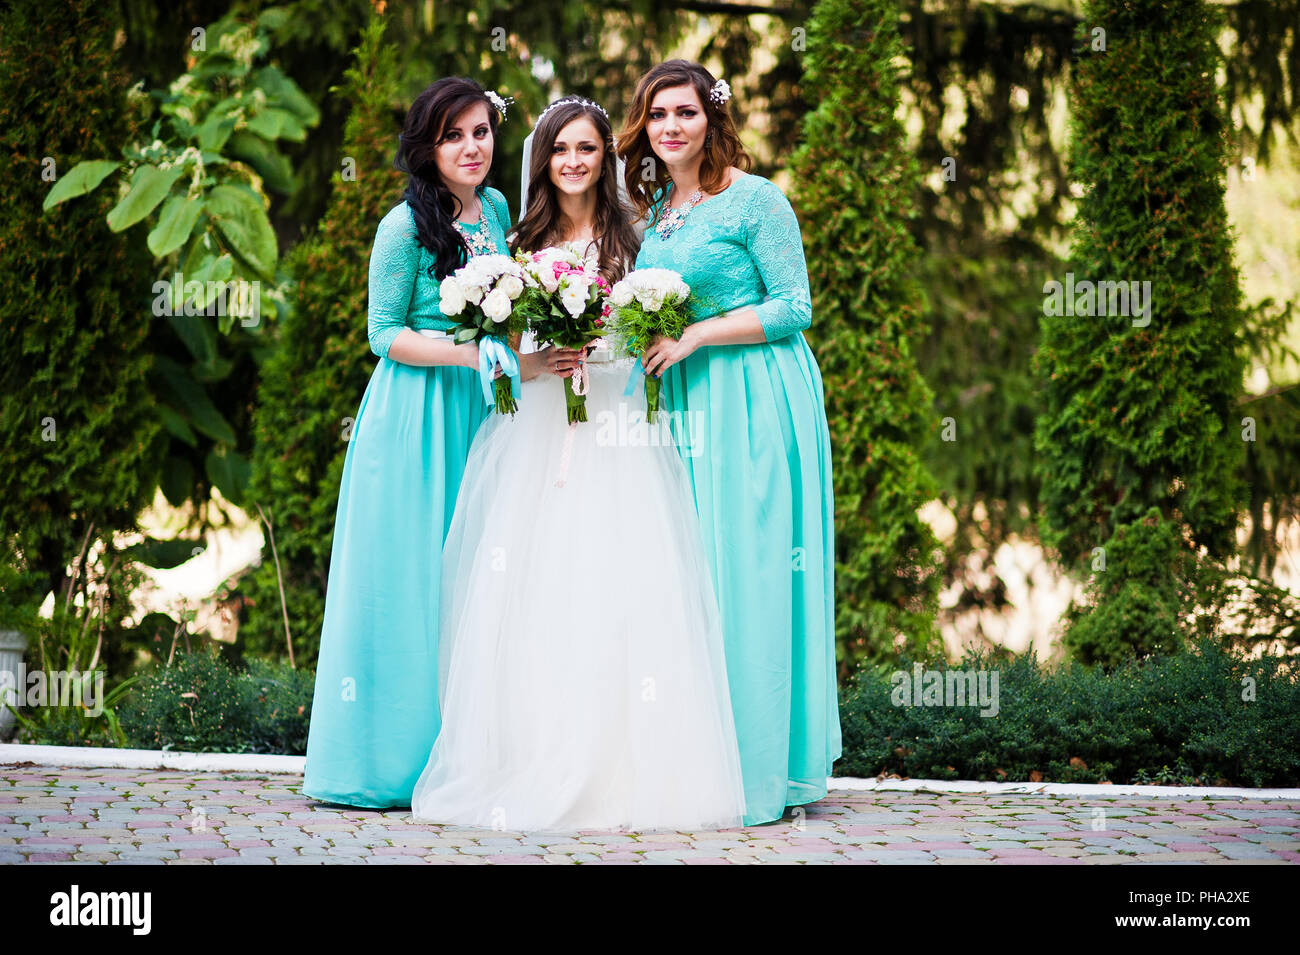 Bride with bridesmaids on turqoise dresses outdoor Stock Photo